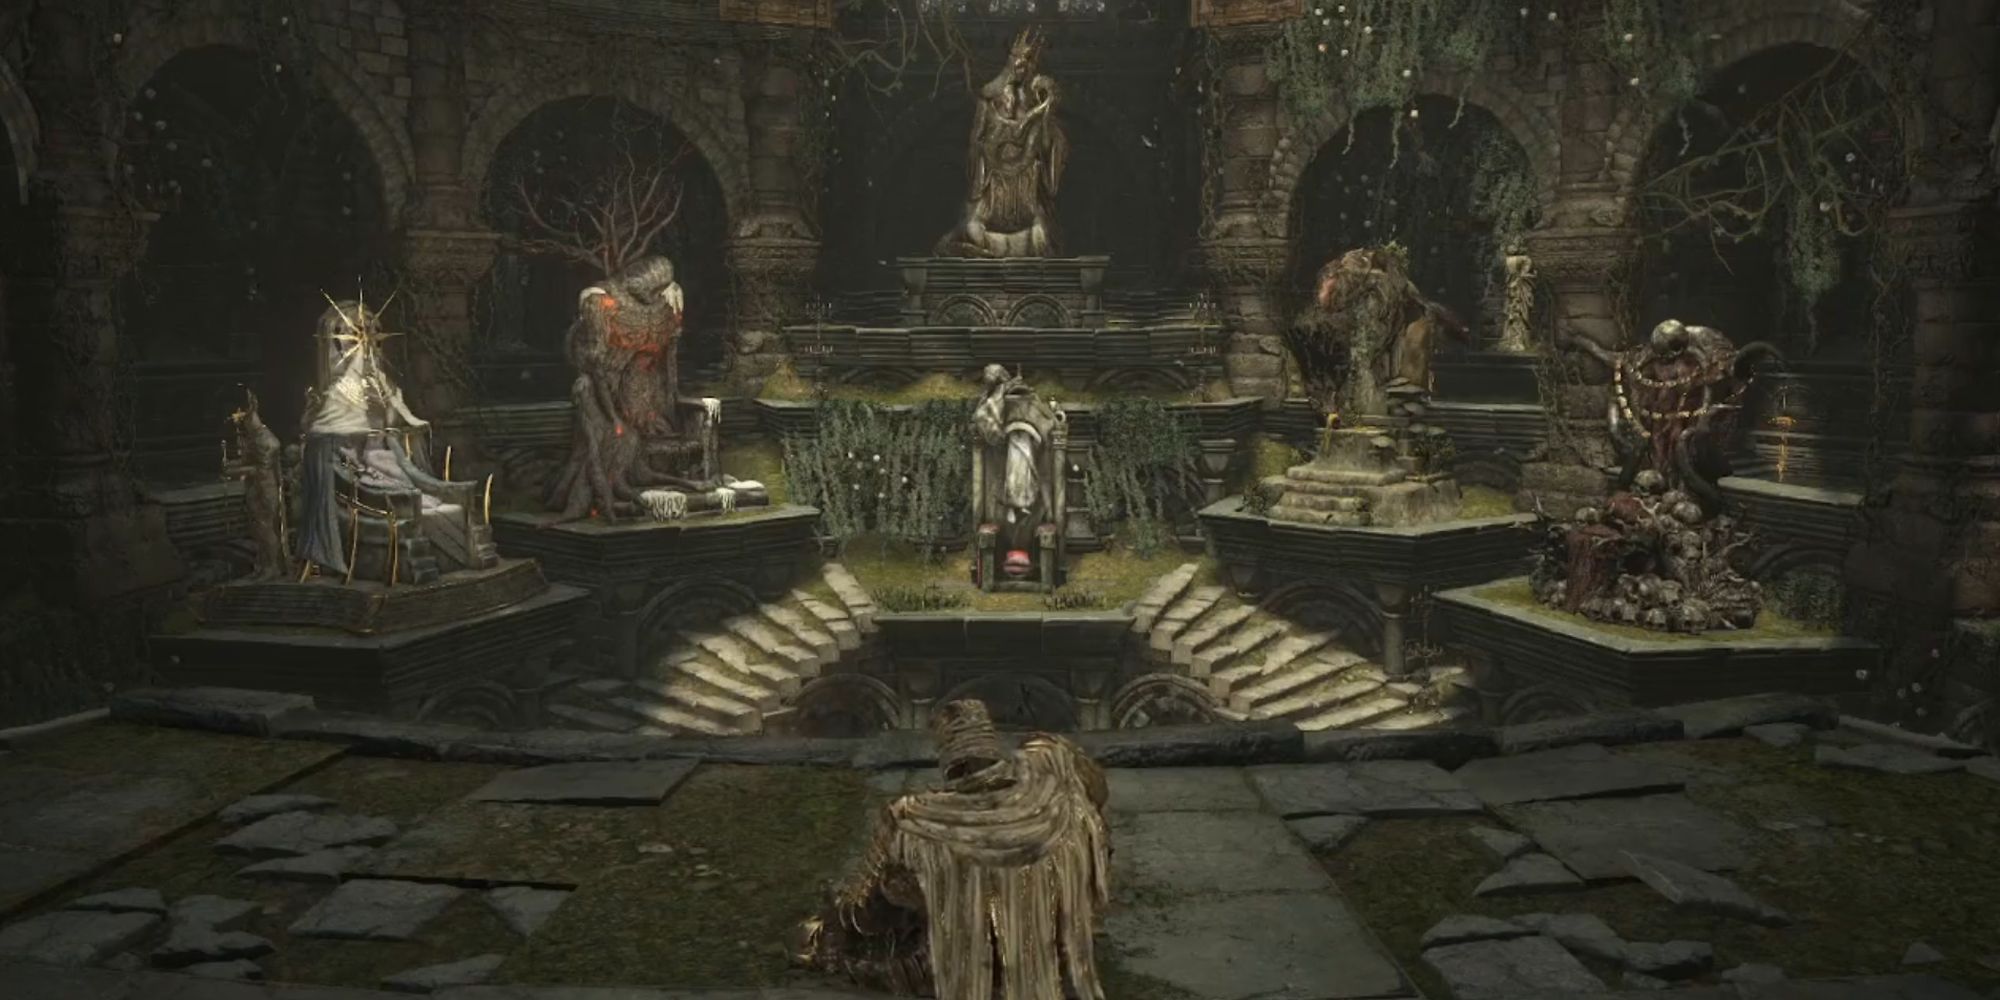 Dark Souls 3 Archthrones Mod Firelink Shrine overgrown with moss and greenery as the player sits looking at six thrones